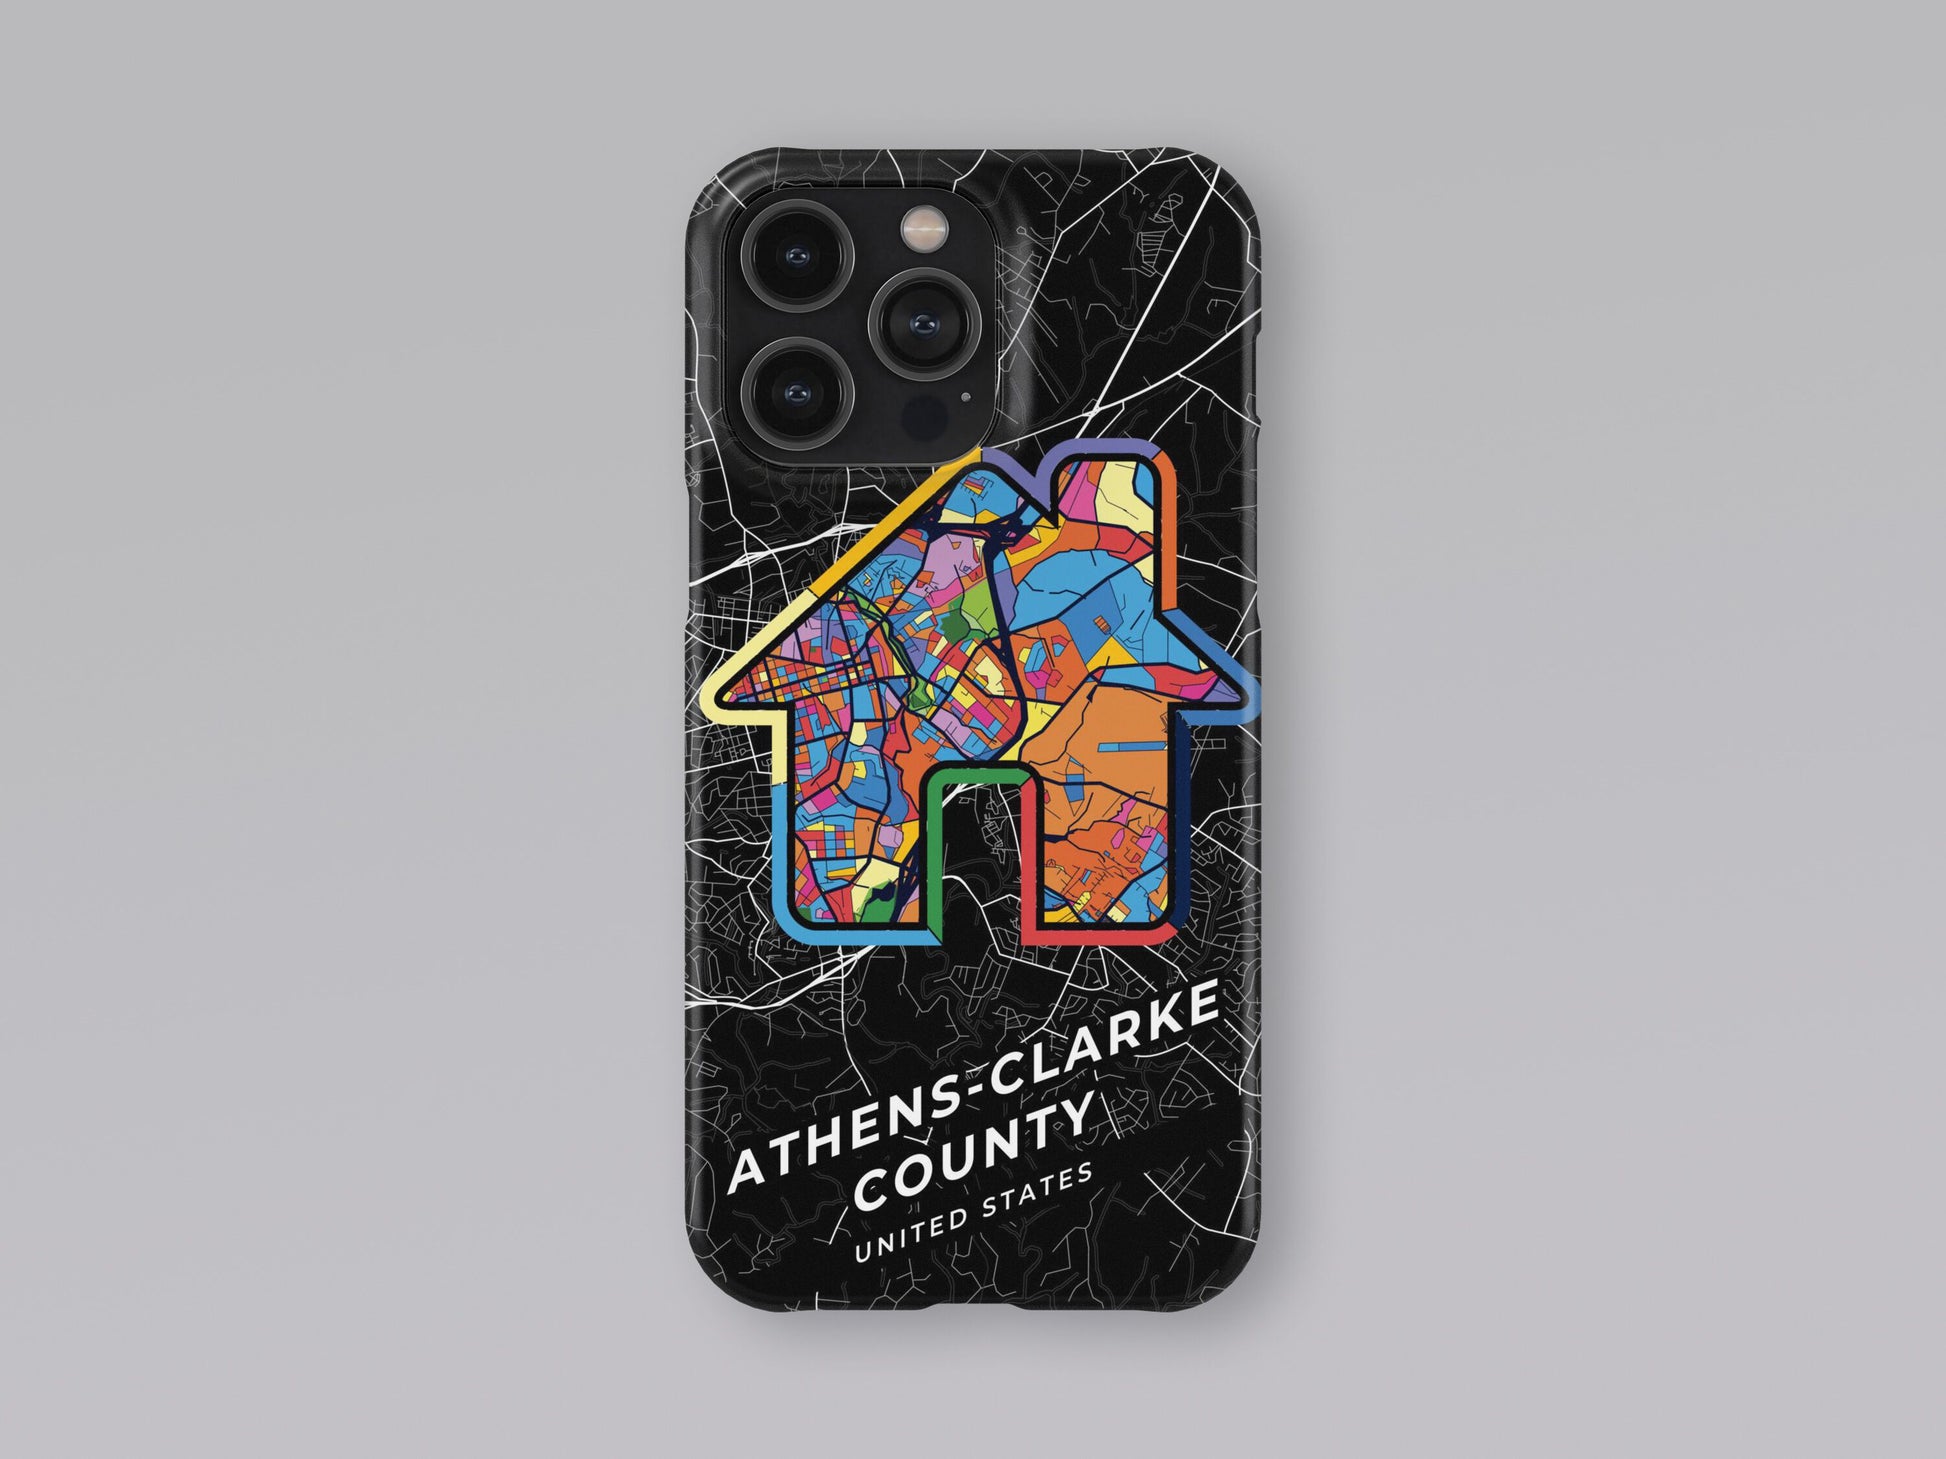 Athens-Clarke County Georgia slim phone case with colorful icon. Birthday, wedding or housewarming gift. Couple match cases. 3